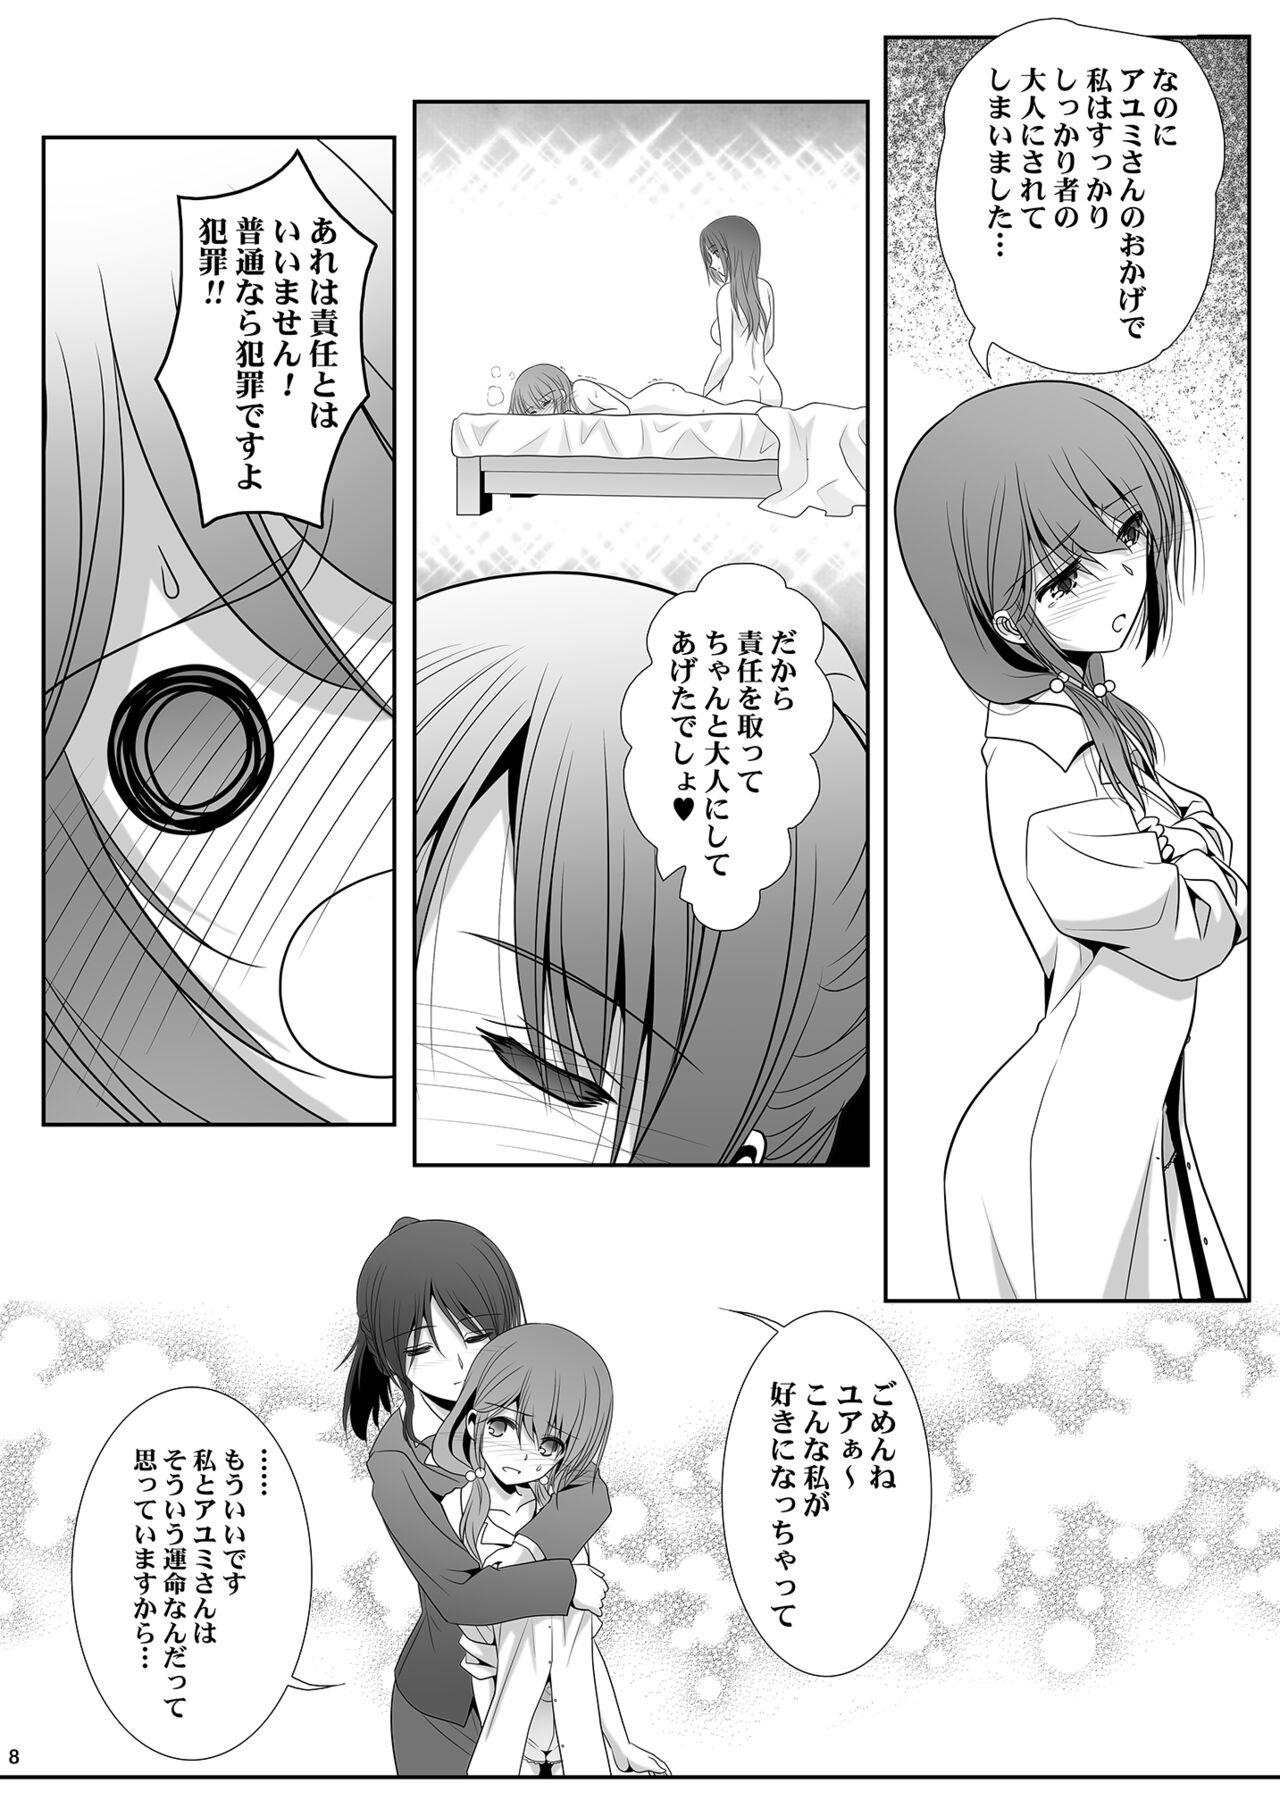 Mask Toshi no Thirteen - Age Difference is 13 Years - Original Real Amateurs - Page 8